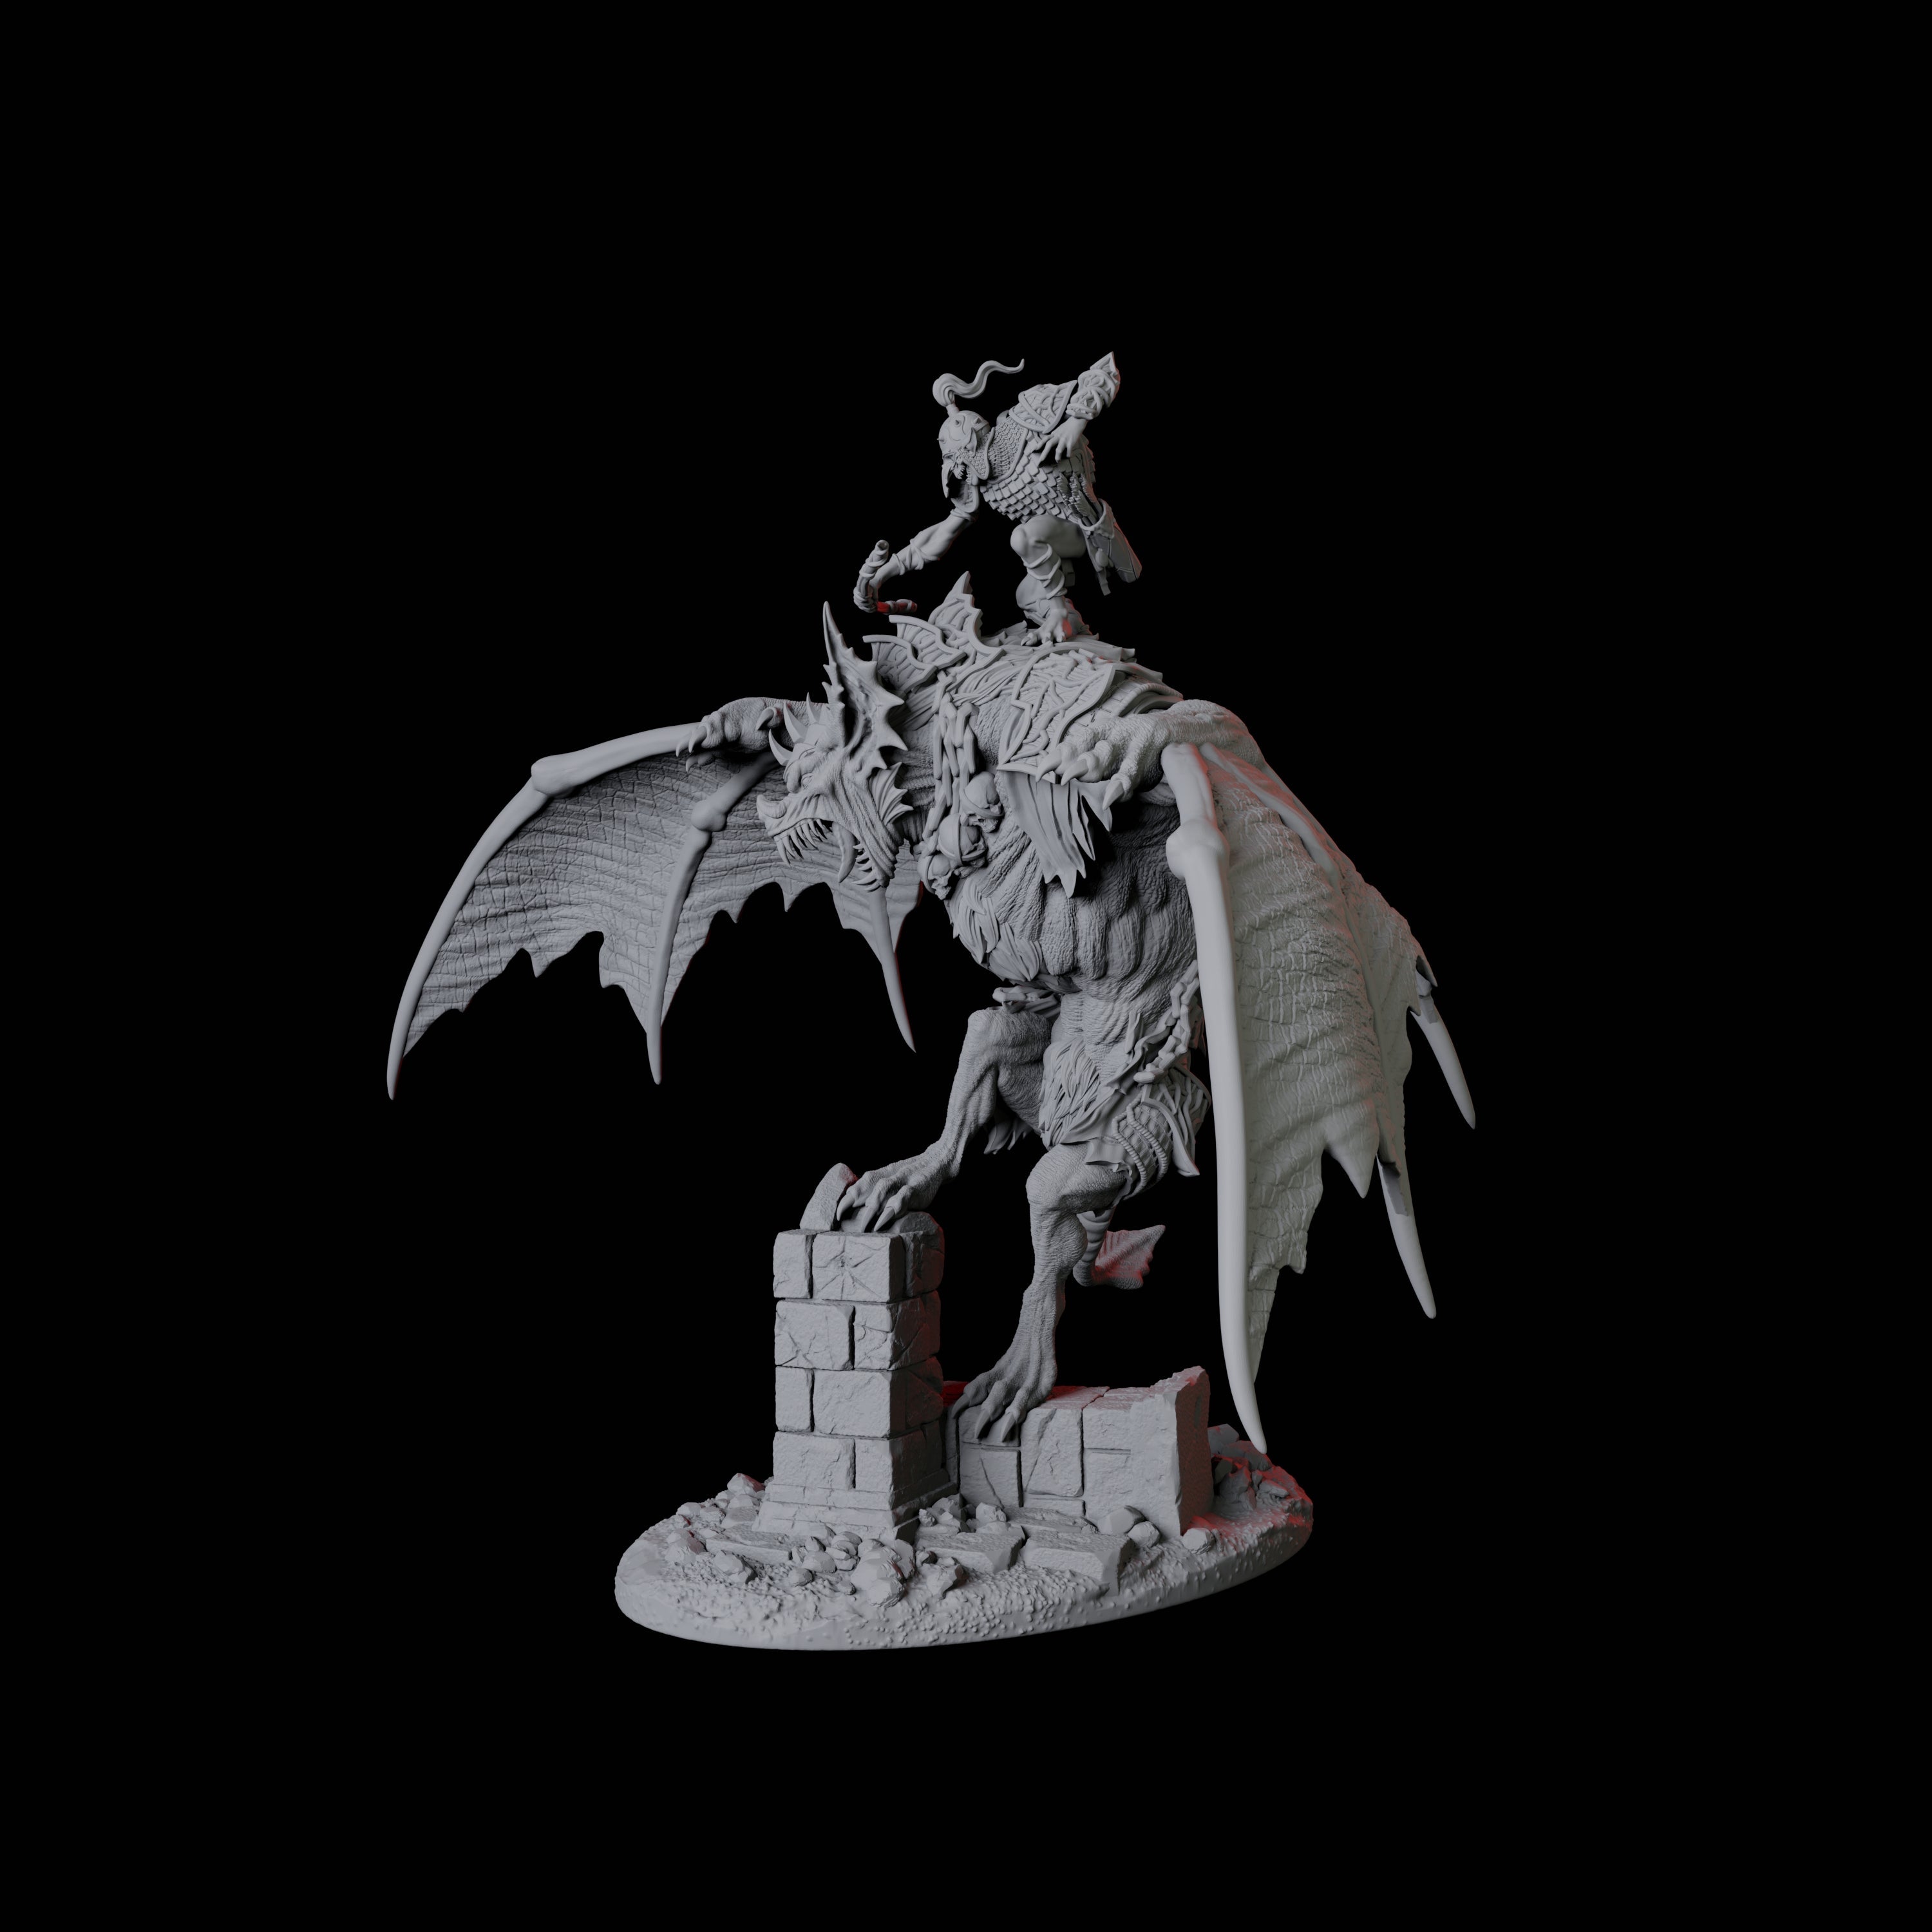 Swooping Vampire Spawn on Giant Bat A Miniature for Dungeons and Dragons, Pathfinder or other TTRPGs